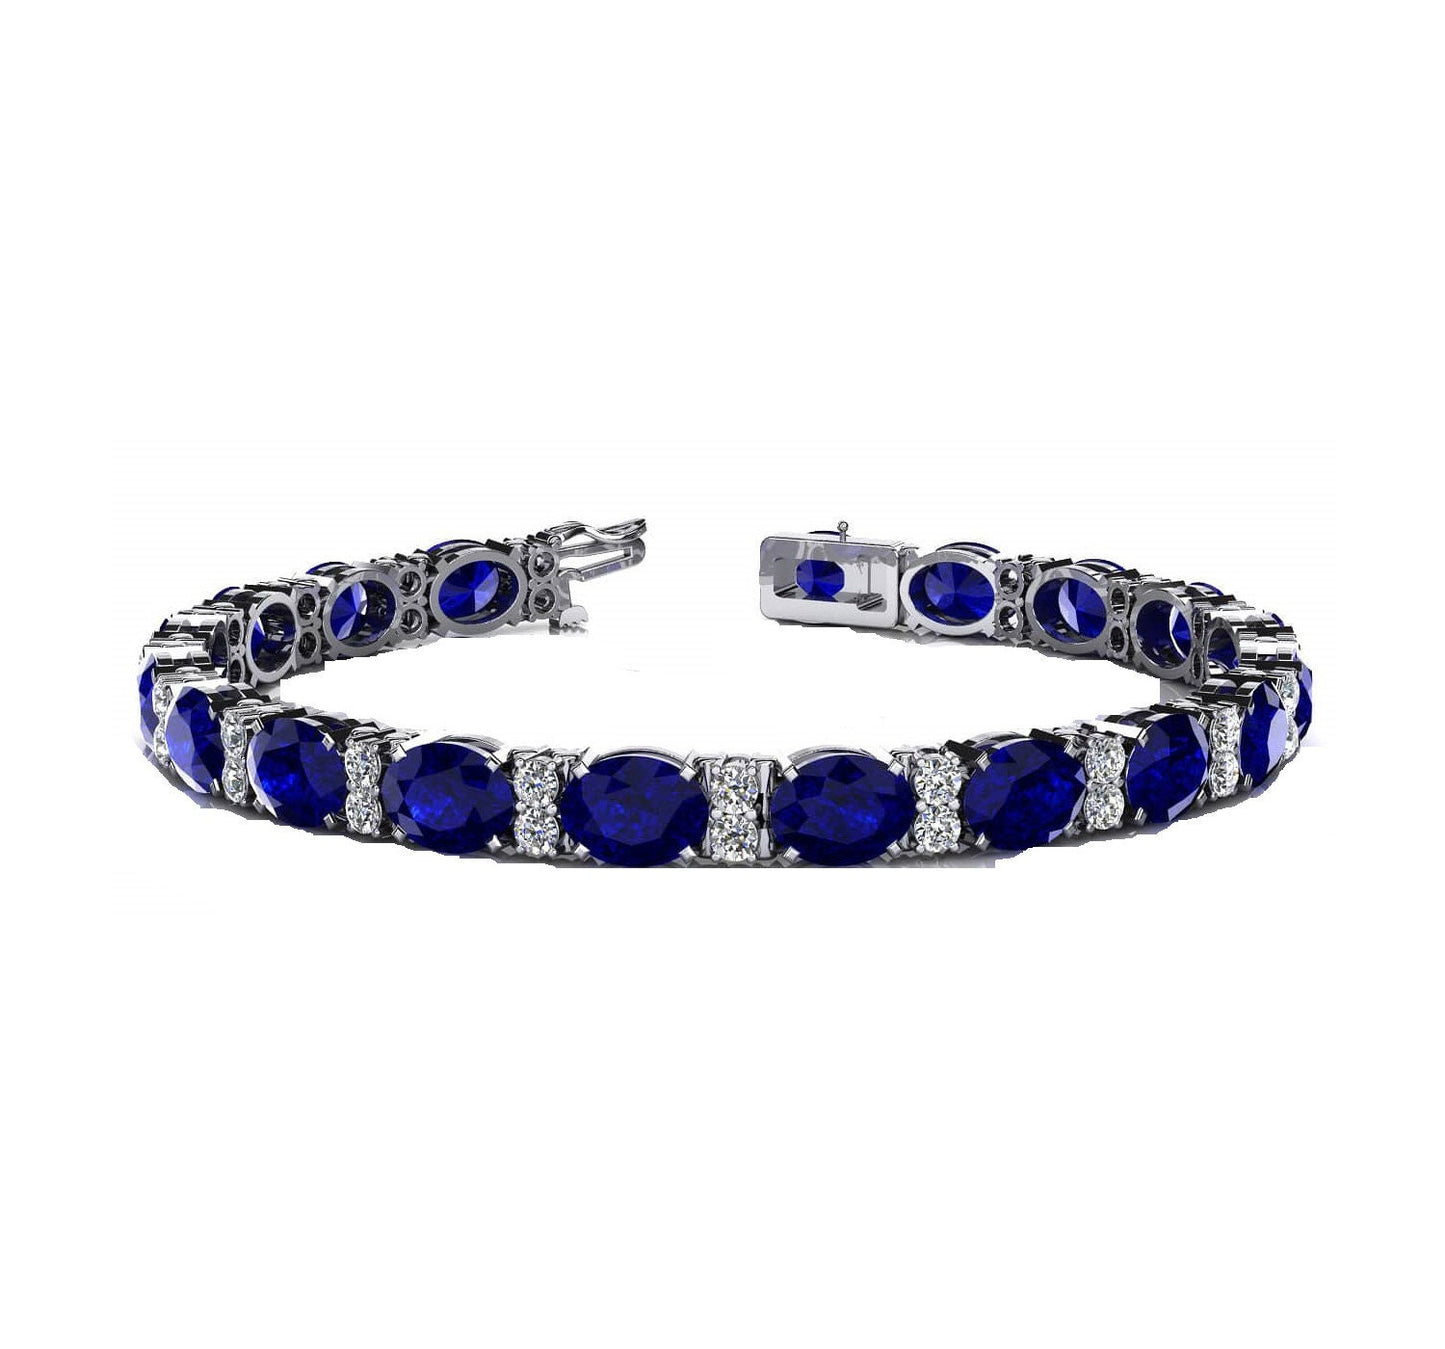 Blue Sapphire Tennis Bracelet, Oval And Round Cut, Moissanite & Sapphire Bracelet, 925 Sterling Silver,14k White Gold Plated, Gifts For Her